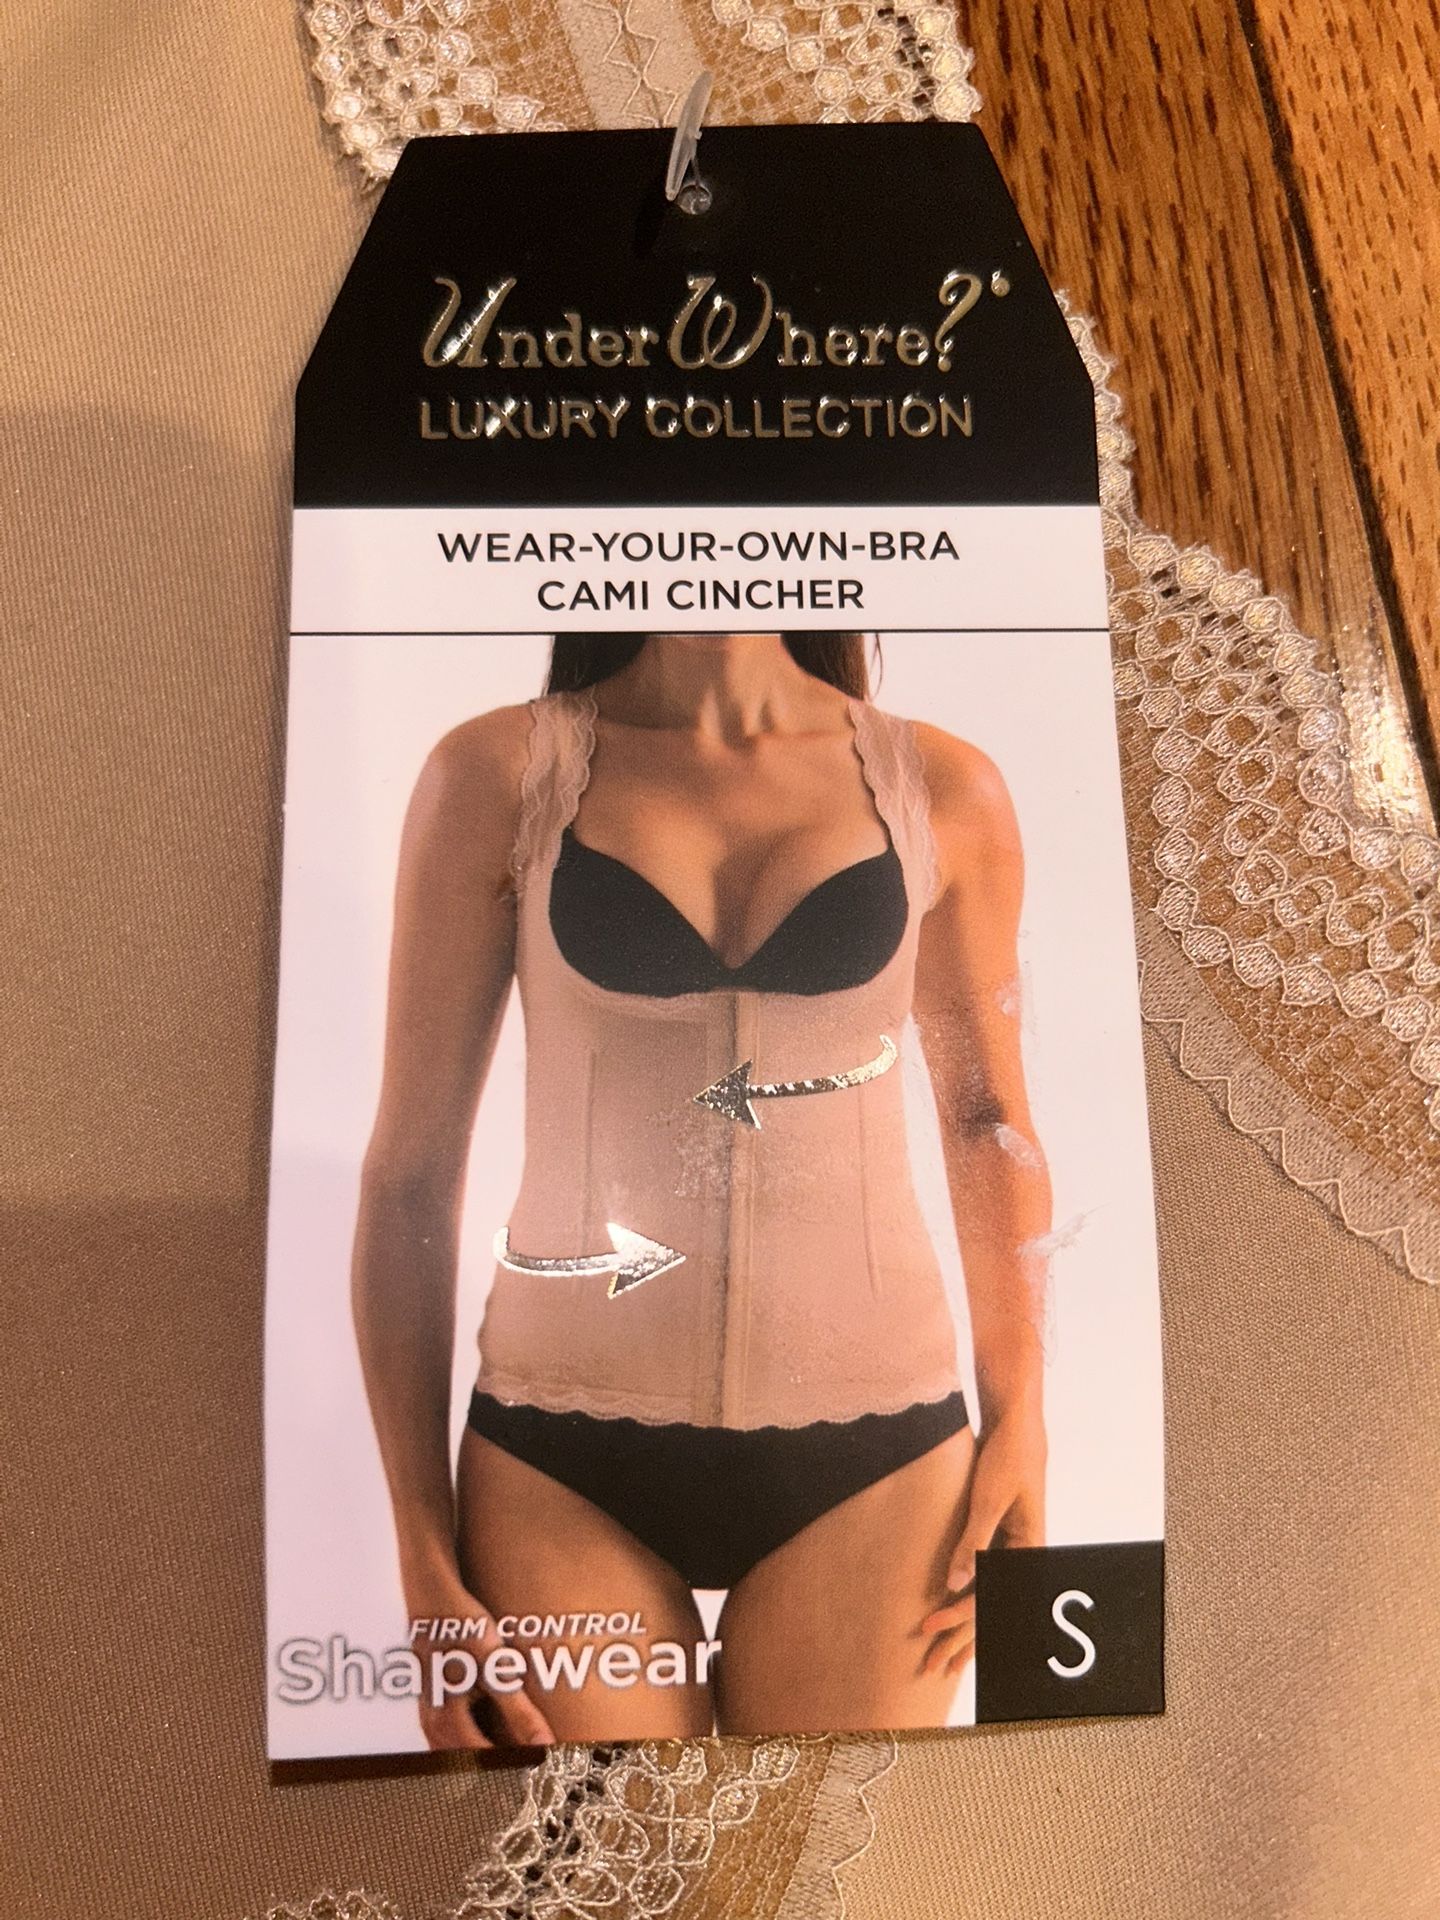 Under Where?LUXURY COLLECTION WEAR-YOUR-OWN-BRA CAMI CINCHER size S for  Sale in Staten Island, NY - OfferUp